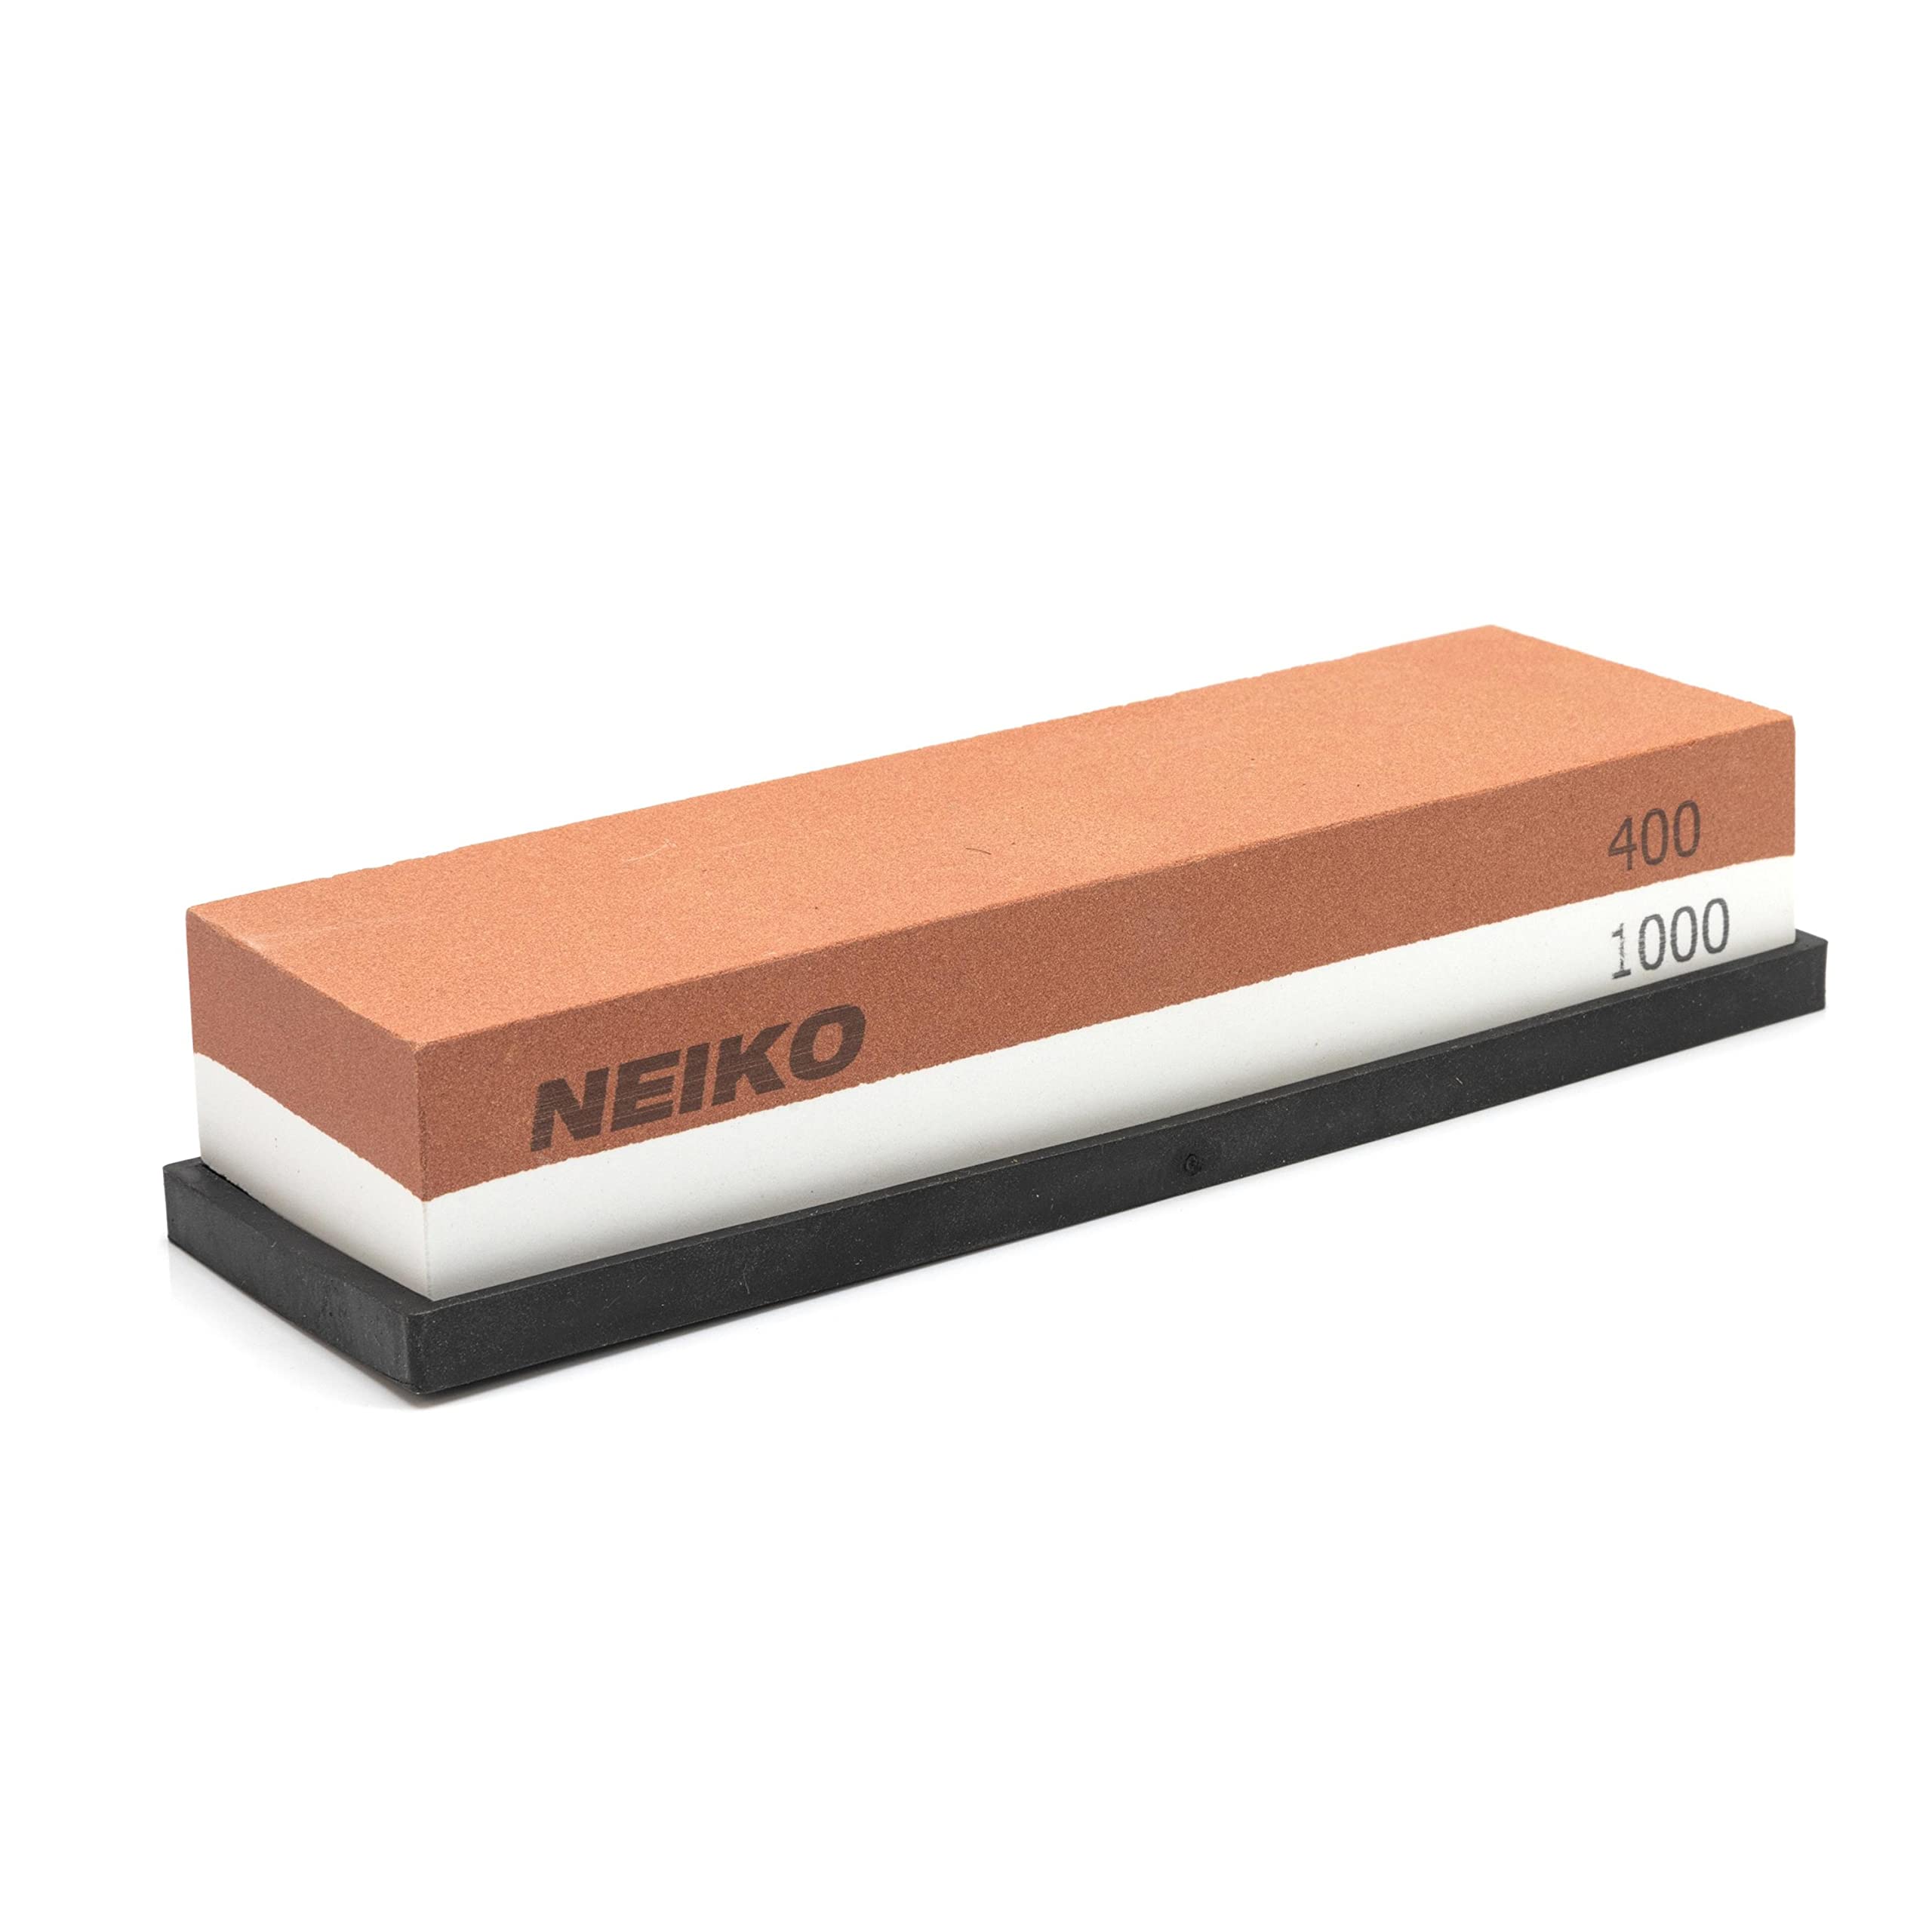 NEIKO 54004A Whetstone, Knife Sharpening Stone, 400 & 1000 Grit, Coarse, 2 Side $6.90 + Free Shipping w/ Prime or on $35+